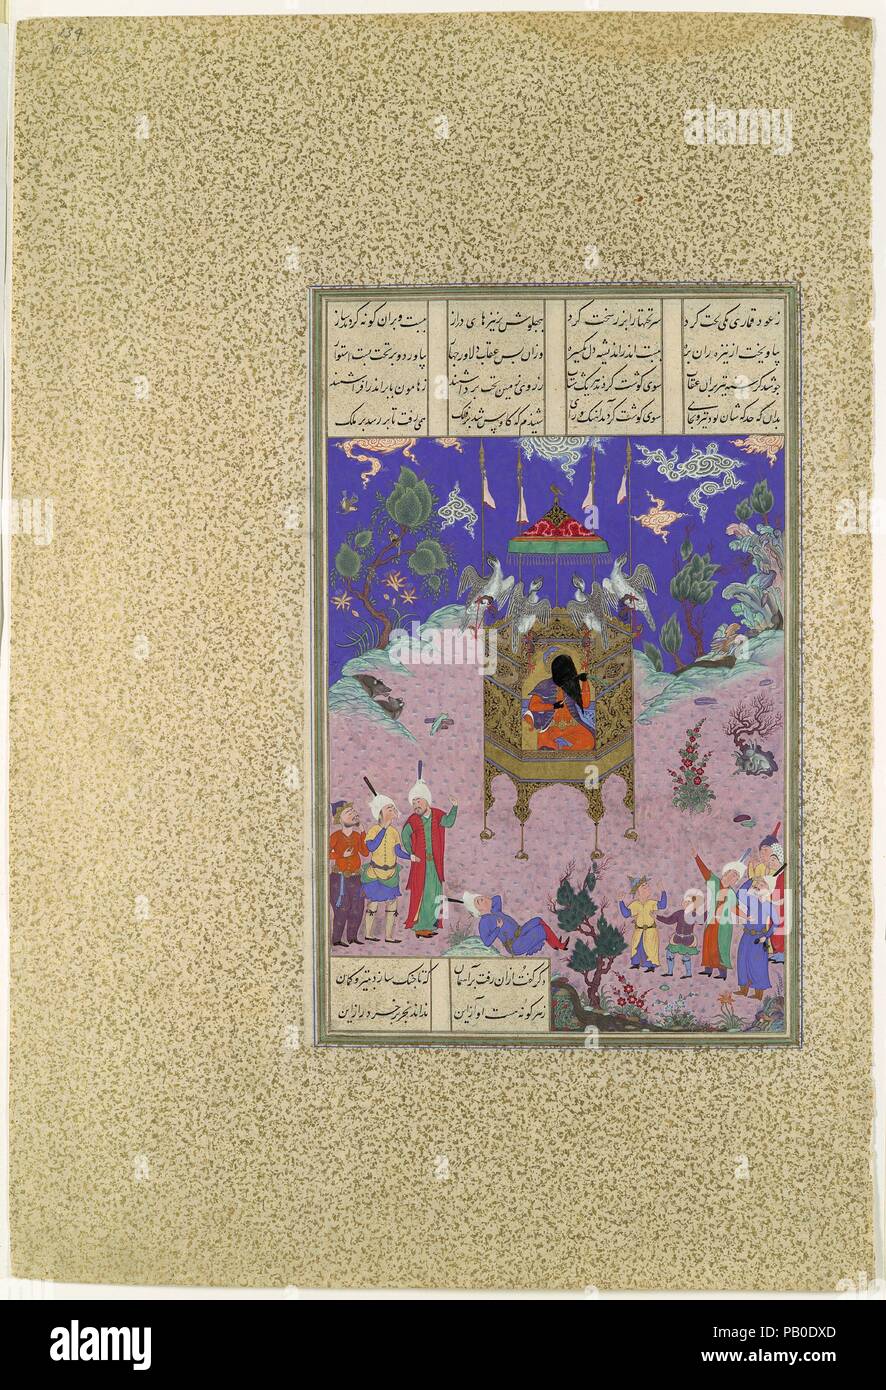 'Kai Kavus Ascends to the Sky', Folio 134r from the Shahnama (Book of Kings) of Shah Tahmasp. Artist: Painting attributed to Qadimi (active ca. 1525-65). Author: Abu'l Qasim Firdausi (935-1020). Dimensions: Painting: H. 11 3/16 in. (28.4 cm)   W. 7 3/16 in. (18.3 cm)  Page: H. 18 5/8 in. (47.3 cm)   W. 12 9/16 in. (31.9 cm)  Mat: H. 22 in. (55.9 cm)  W. 16 in. (40.6 cm). Date: ca. 1525-30.  Kai Kavus was a long-lived powerful king and a capricious ruler. One day, while hunting, he was approached by a div disguised as a handsome youth. The ill-natured devil began praising him, saying that his r Stock Photo